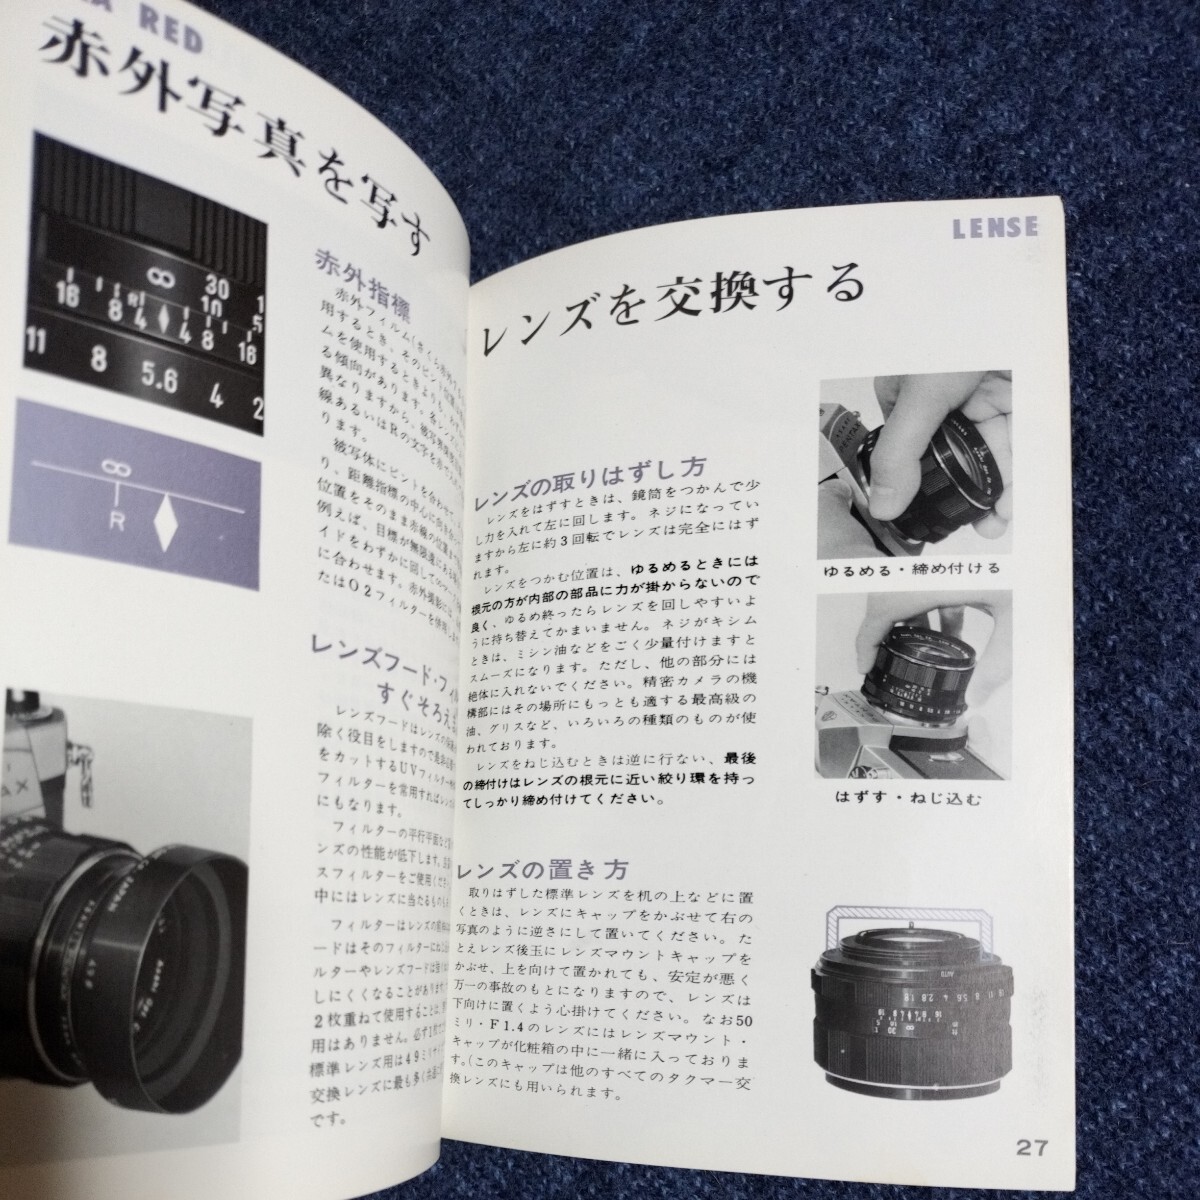 [ manual ] Asahi Pentax SL. how to use /tak mare nz. book@2 point together 